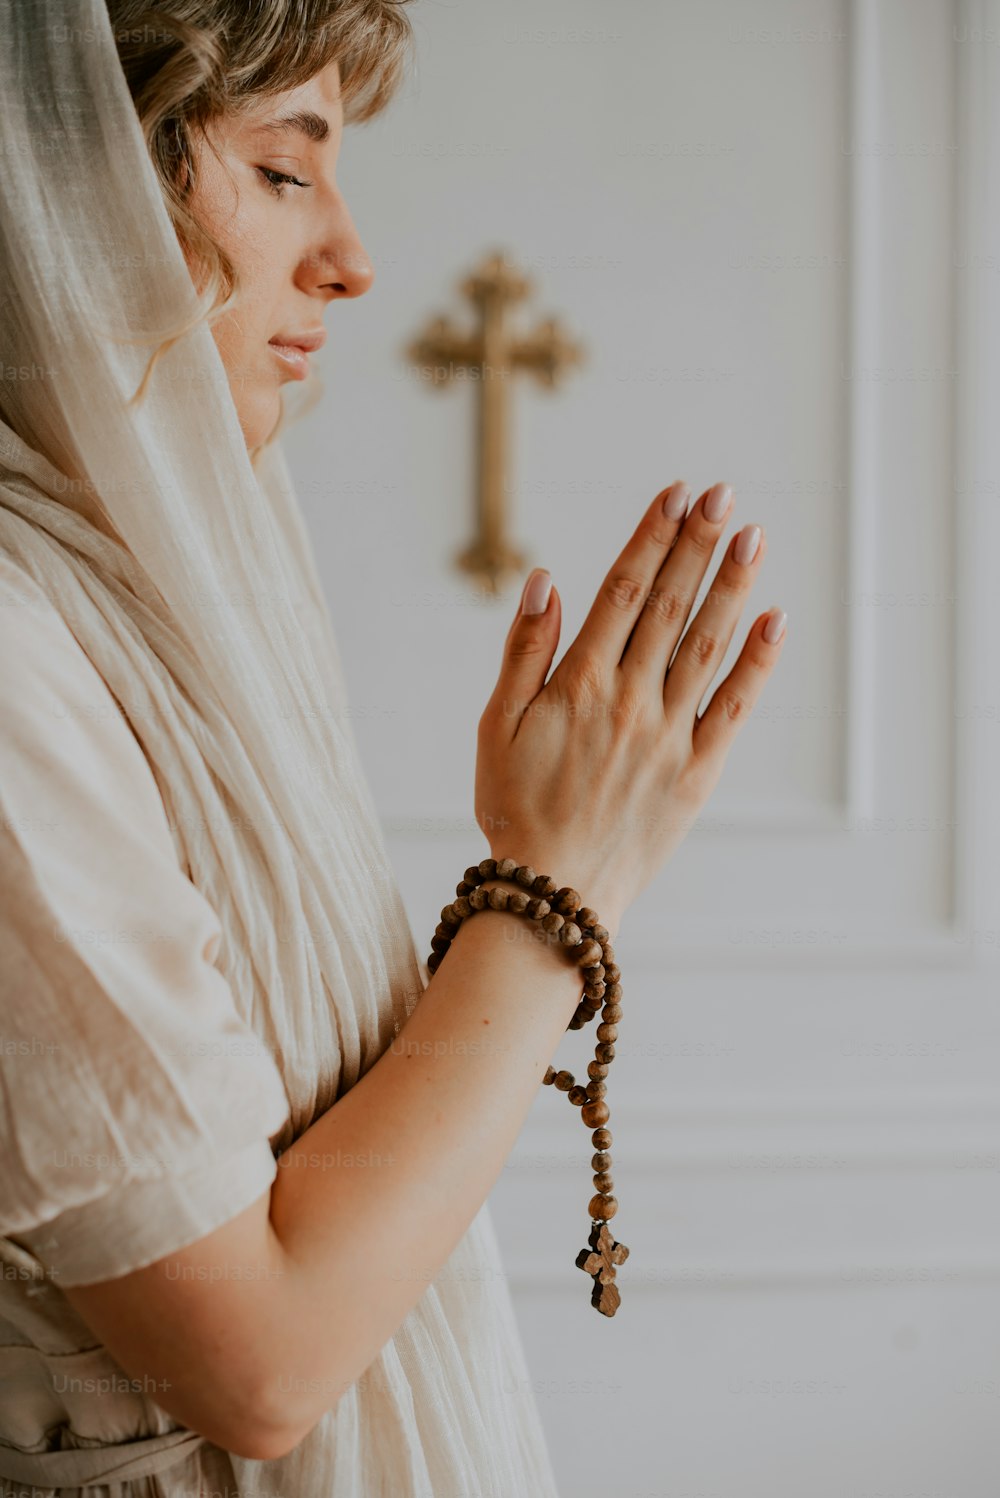 a woman wearing a veil and holding a rosary